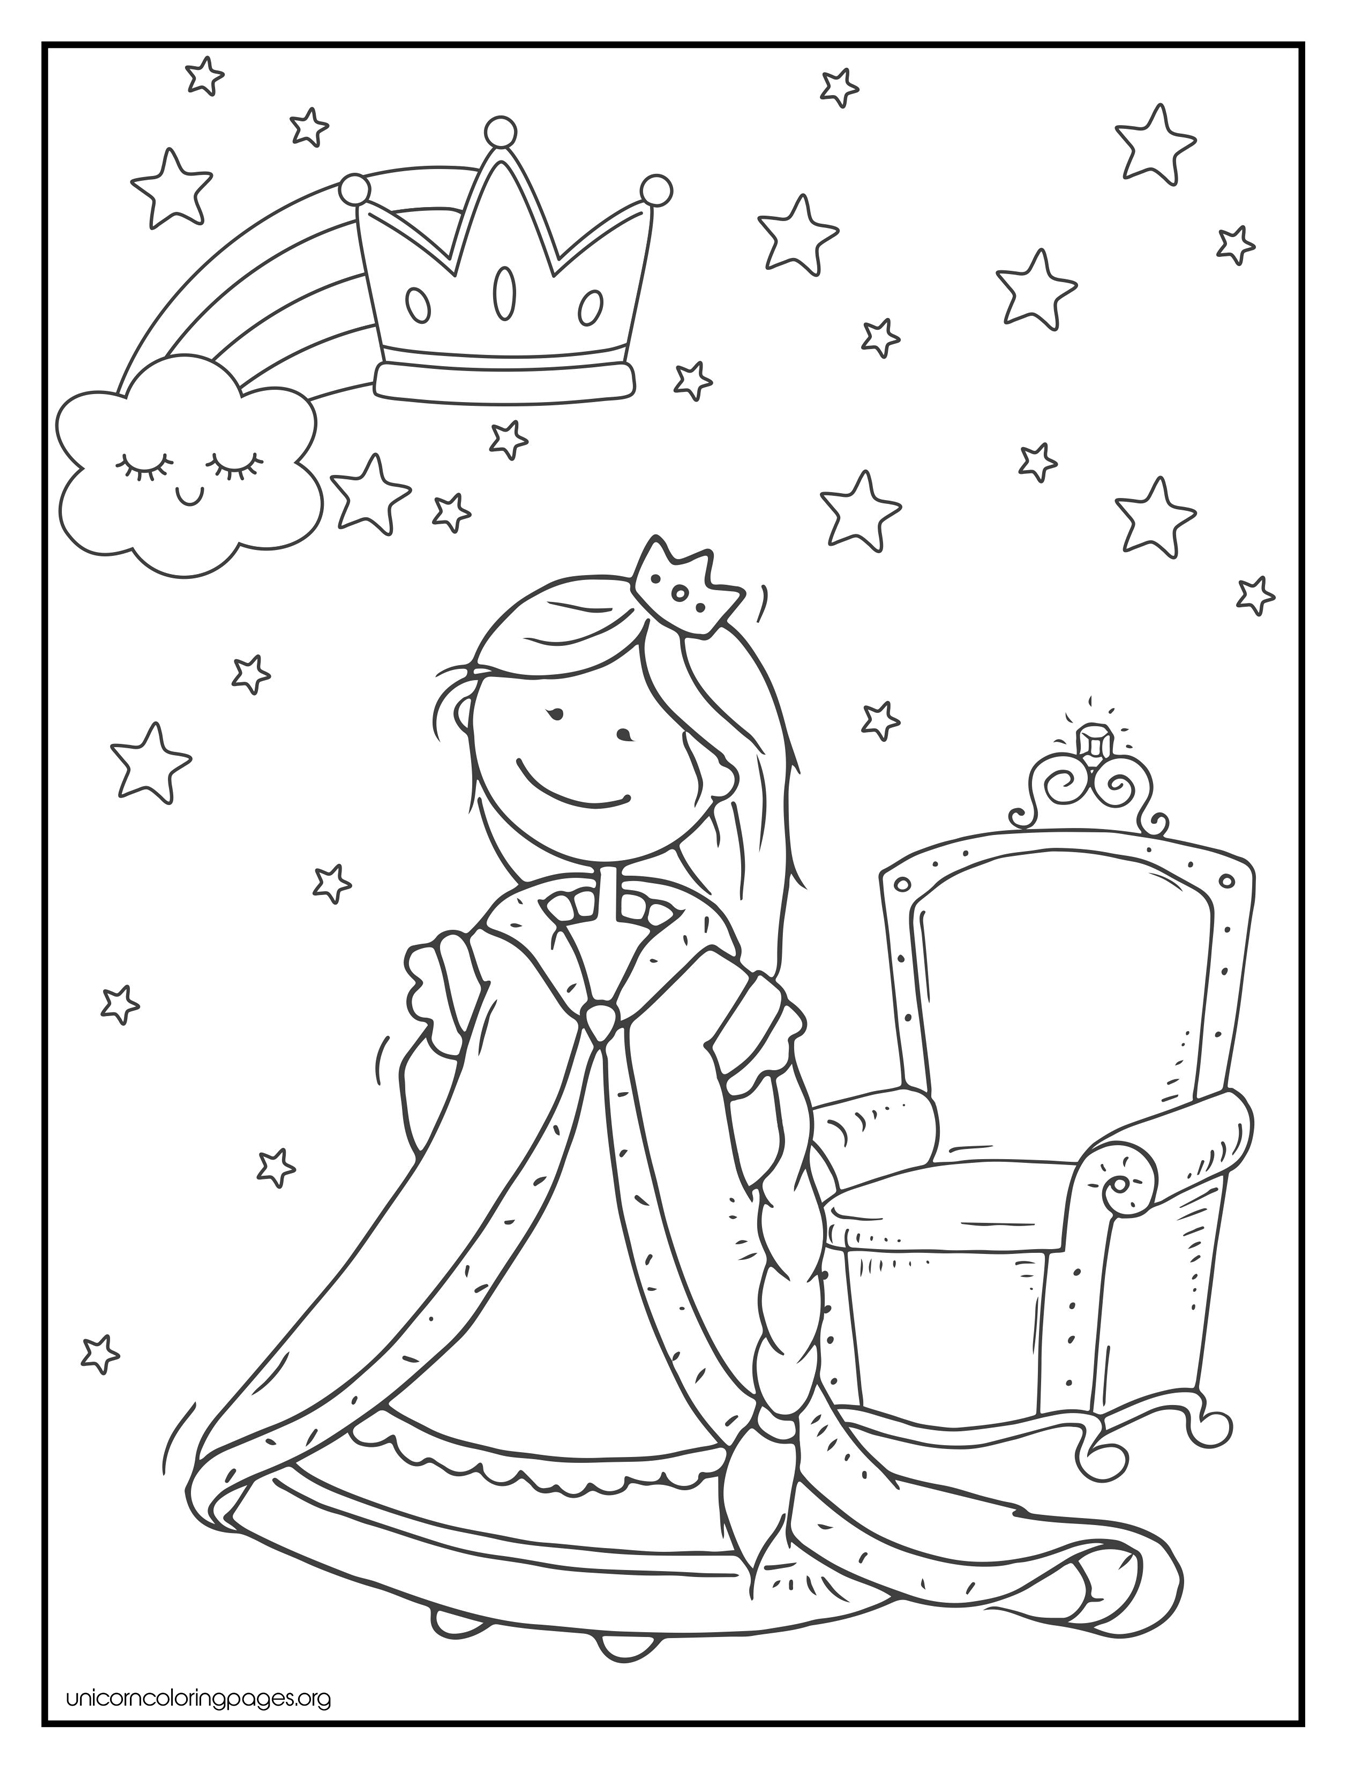 Easy Princess Coloring Pages